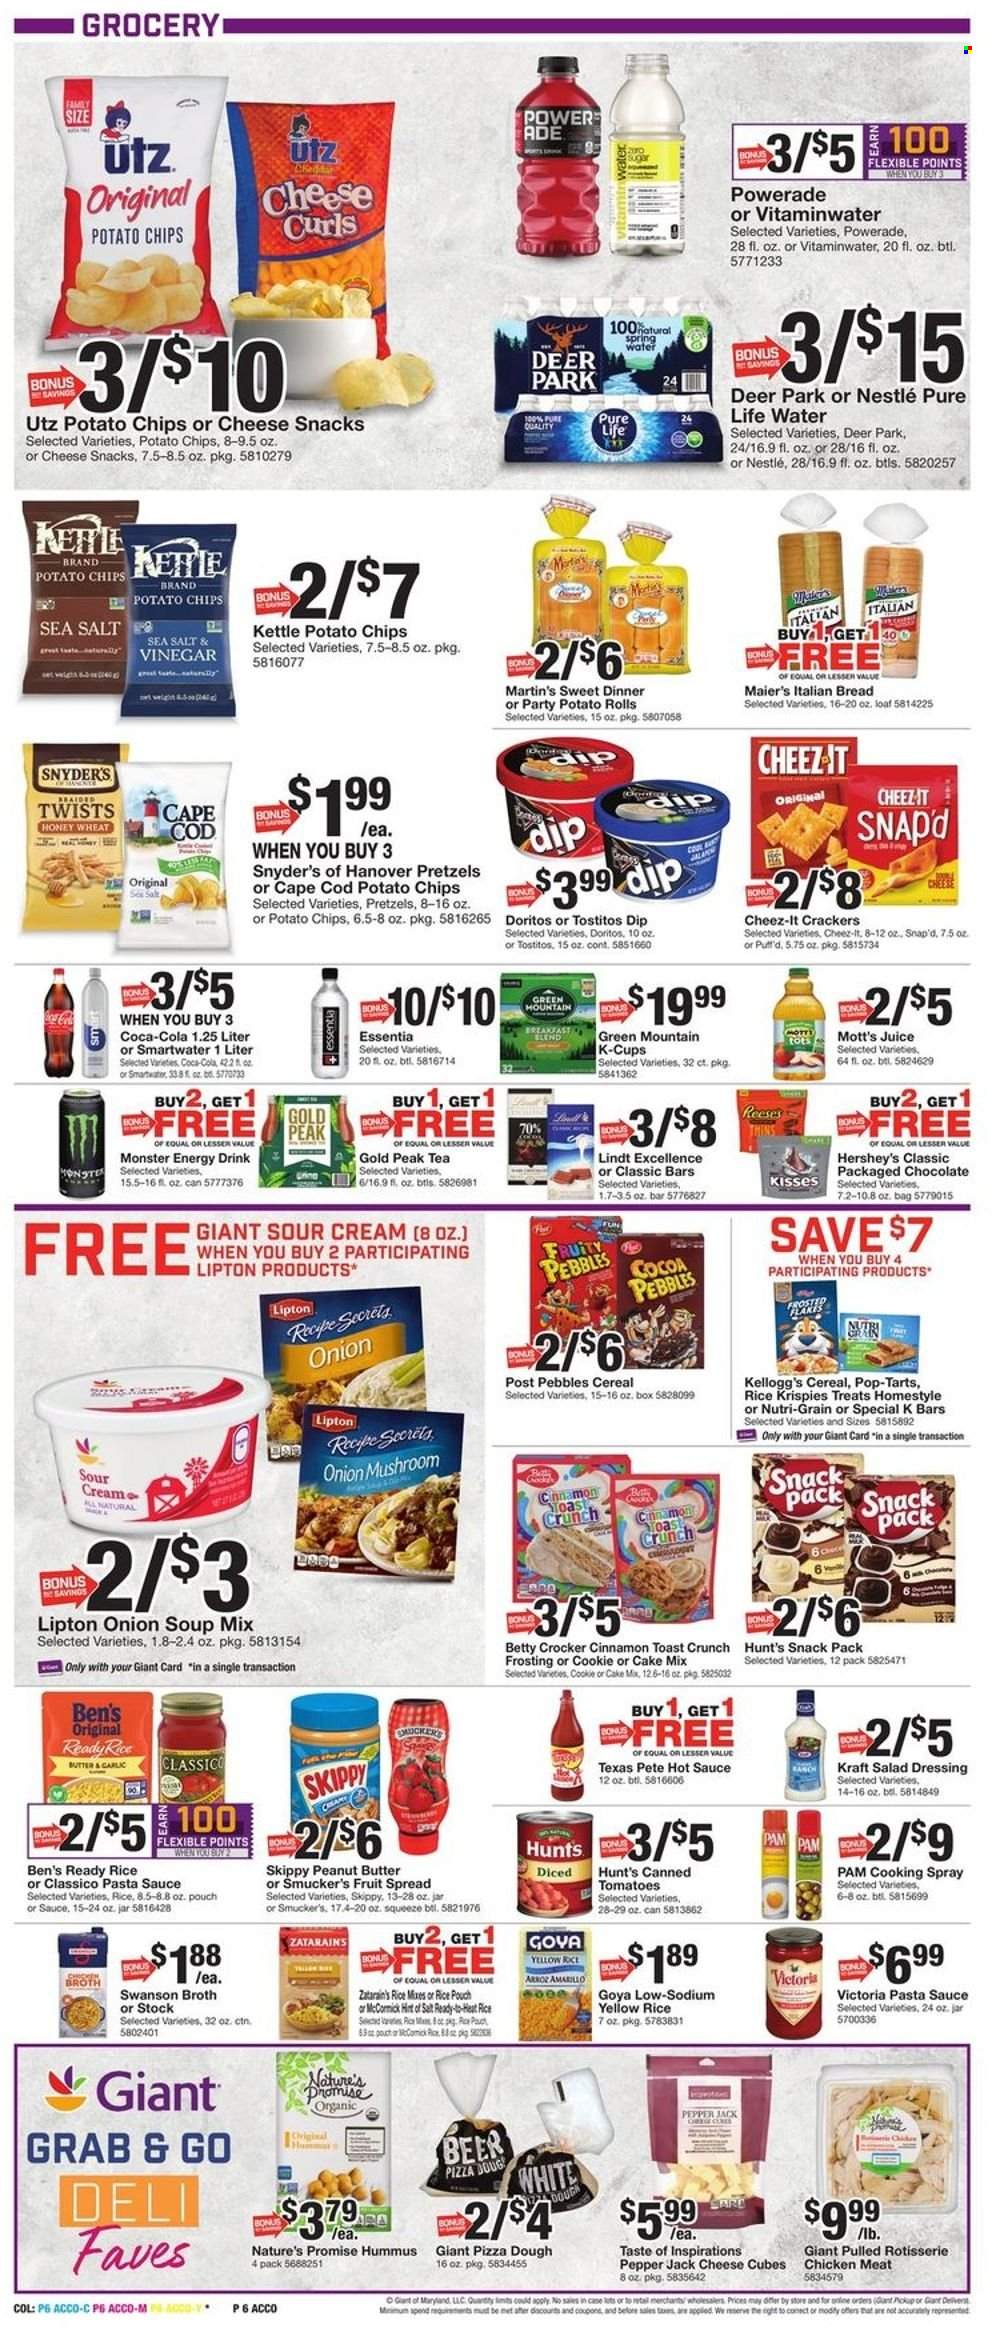 thumbnail - Giant Food Flyer - 01/27/2023 - 02/02/2023 - Sales products - pretzels, tart, Nature’s Promise, potato rolls, cake mix, soup mix, snack, Mott's, chicken roast, pasta sauce, onion soup, Kraft®, ready meal, rice sides, hummus, Pepper Jack cheese, snack bar, pizza dough, Reese's, Hershey's, cookies, Nestlé, chocolate, Lindt, crackers, Kellogg's, Pop-Tarts, breakfast bar, bars, Doritos, potato chips, Thins, Cheez-It, Tostitos, frosting, broth, baking mix, canned tomatoes, Goya, cereals, crispy rice bar, Fruity Pebbles, Nutri-Grain, salad dressing, hot sauce, dressing, Classico, cooking spray, fruit jam, Coca-Cola, Powerade, juice, energy drink, Lipton, ice tea, soft drink, Monster Energy, Gold Peak Tea, electrolyte drink, spring water, bottled water, Pure Life Water, Smartwater, vitamin water, water, carbonated soft drink, coffee capsules, K-Cups, Green Mountain, alcohol, beer, mop. Page 6.